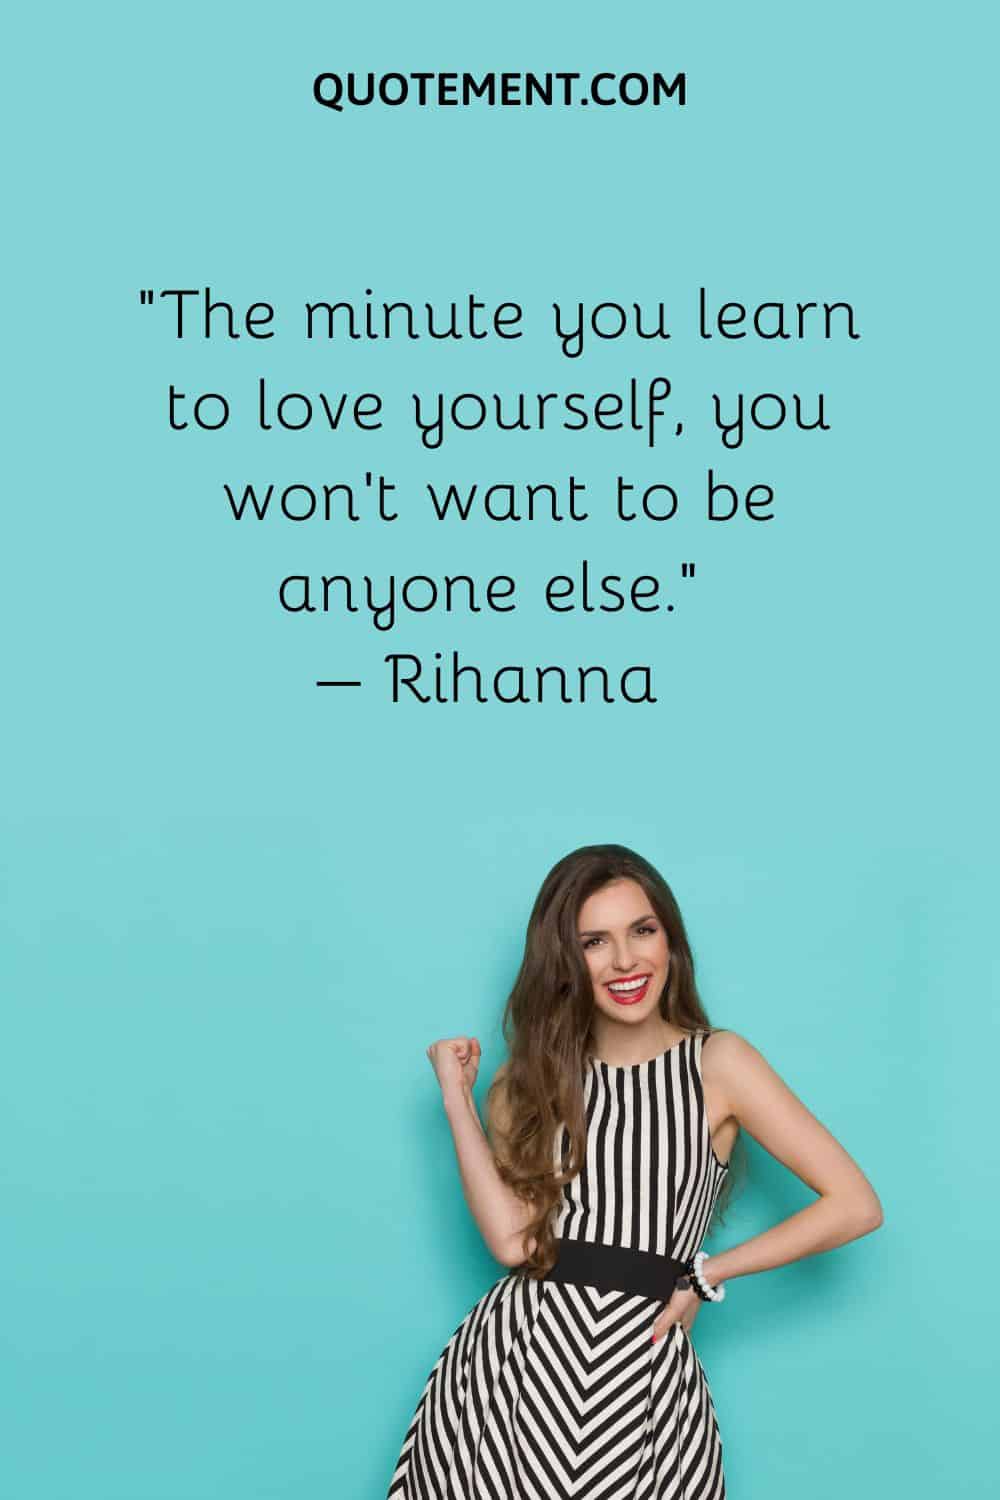 The minute you learn to love yourself, you won’t want to be anyone else